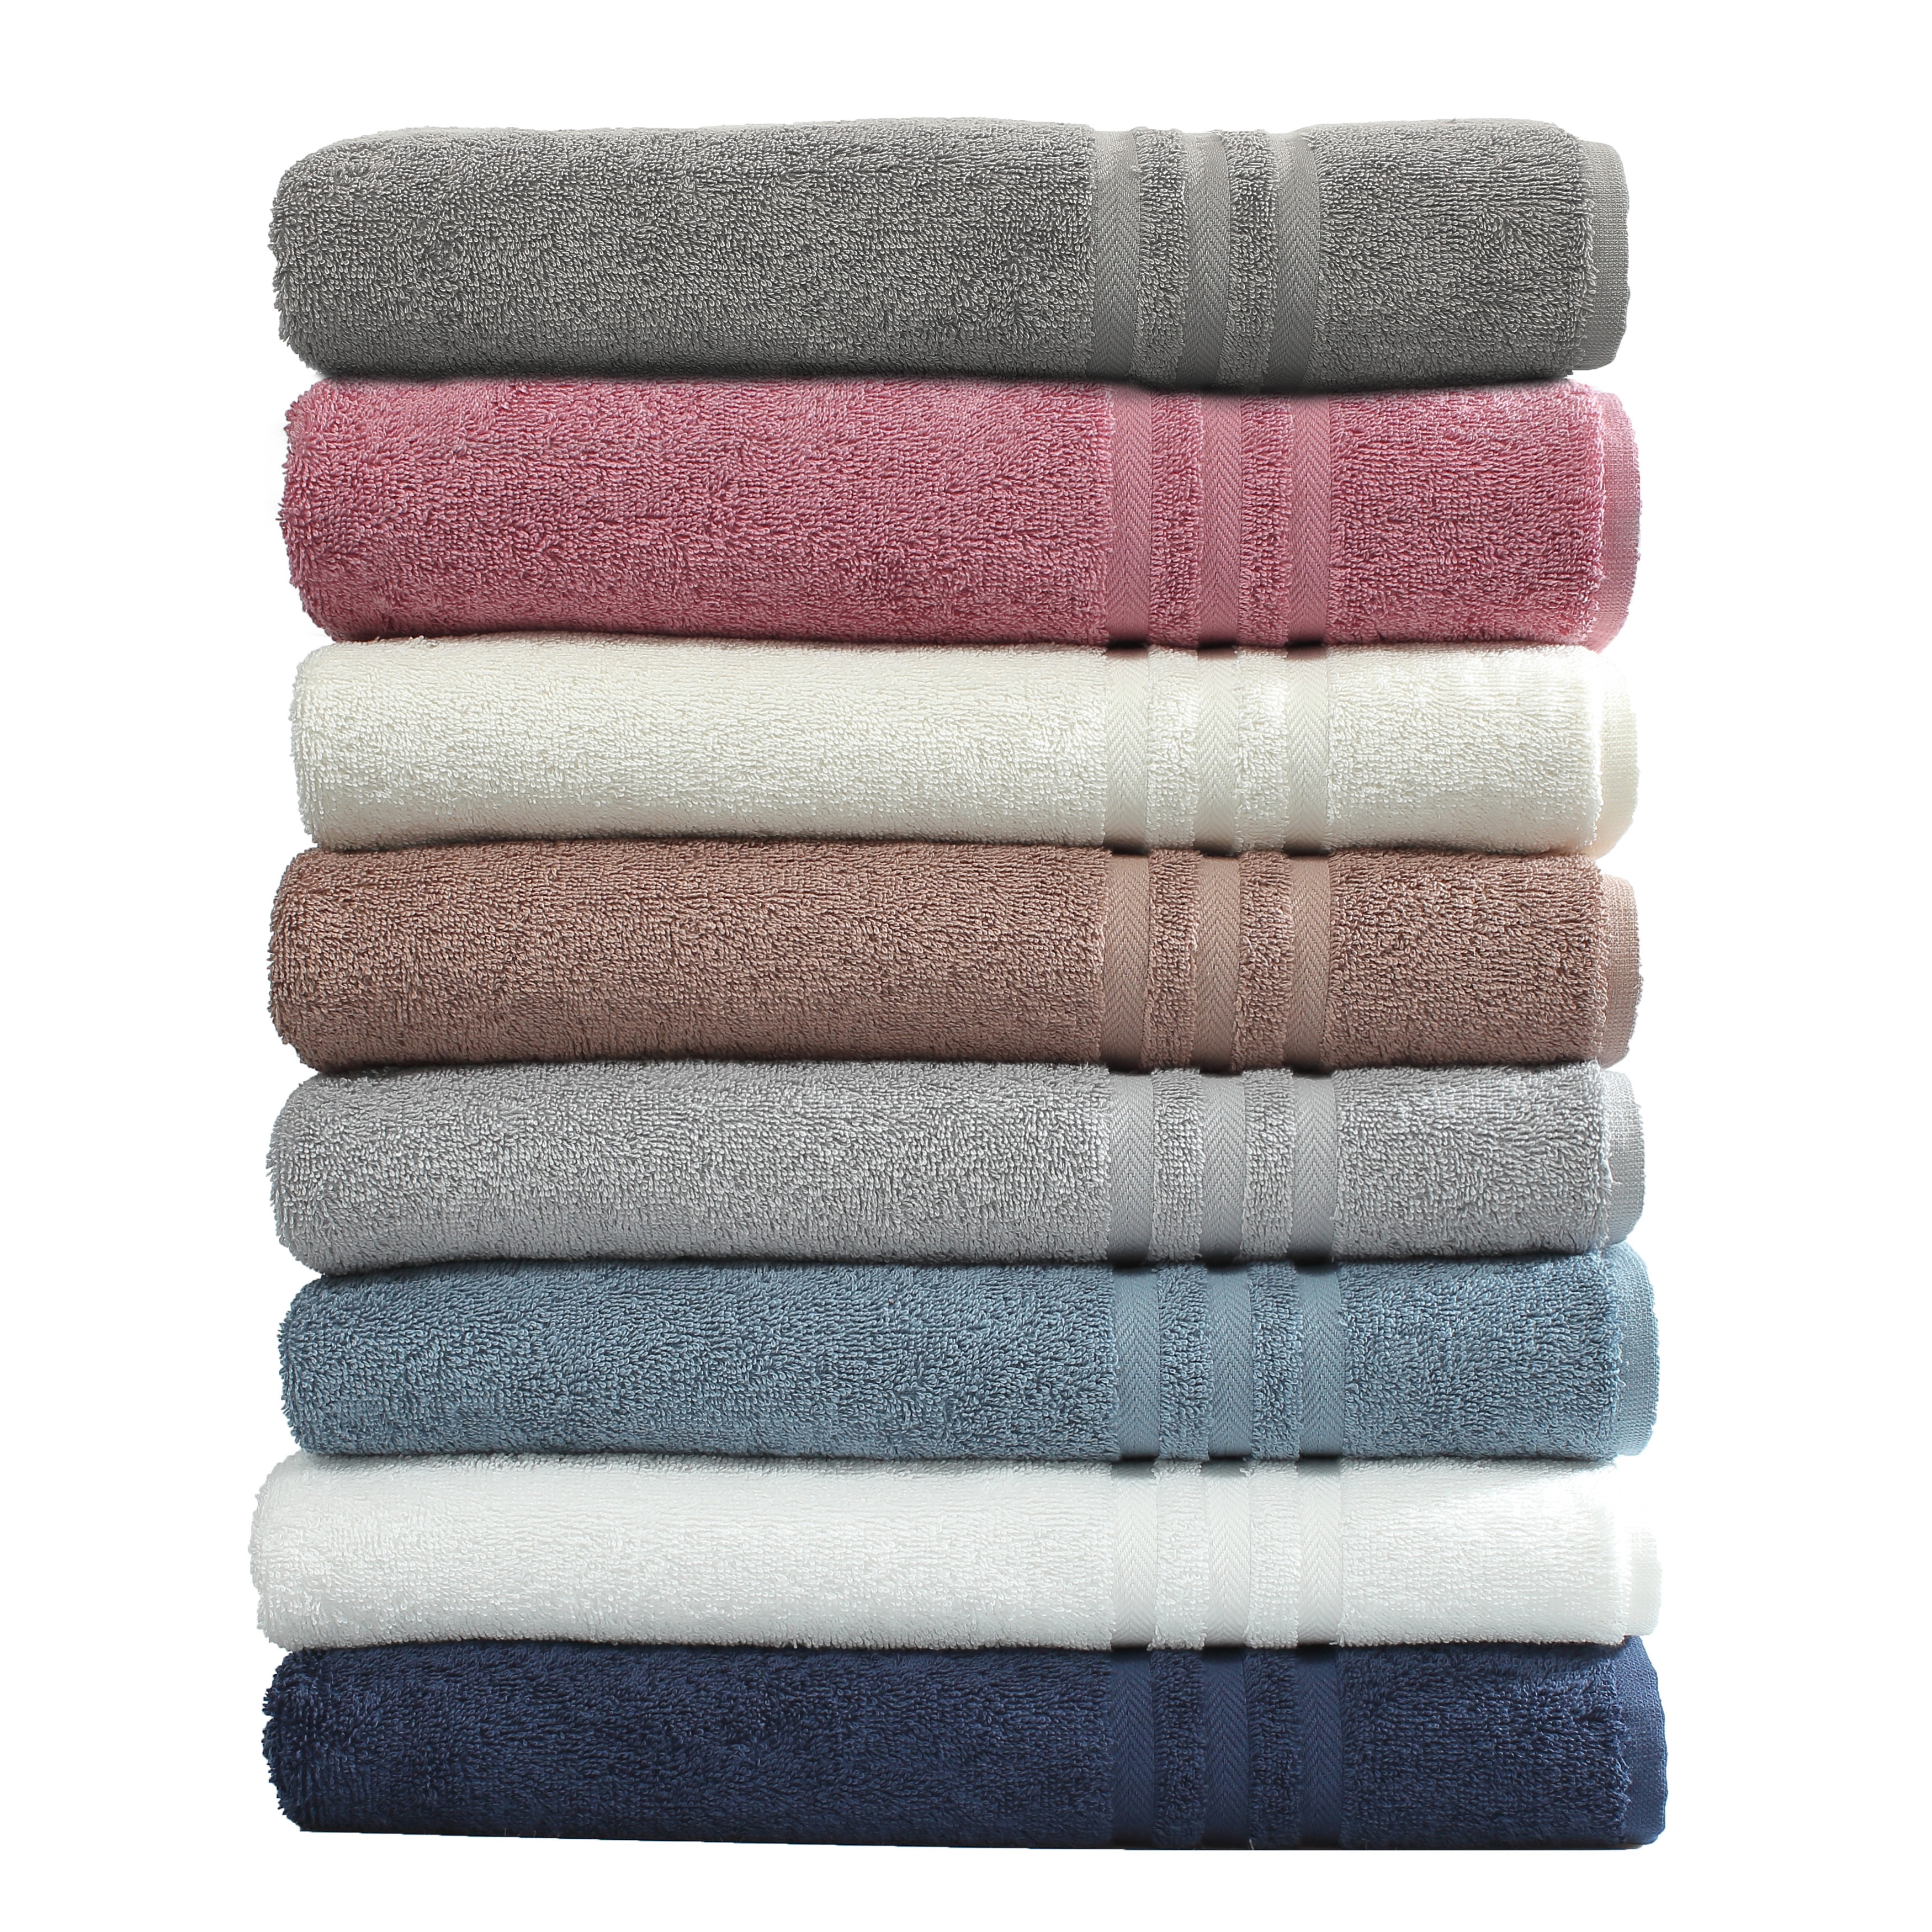 https://ak1.ostkcdn.com/images/products/12855990/Authentic-Hotel-and-Spa-Omni-Turkish-Cotton-Terry-Oversized-Bath-Sheet-Towels-Set-of-2-09abd301-6aa1-426f-b990-ac4f5f8bc714.jpg